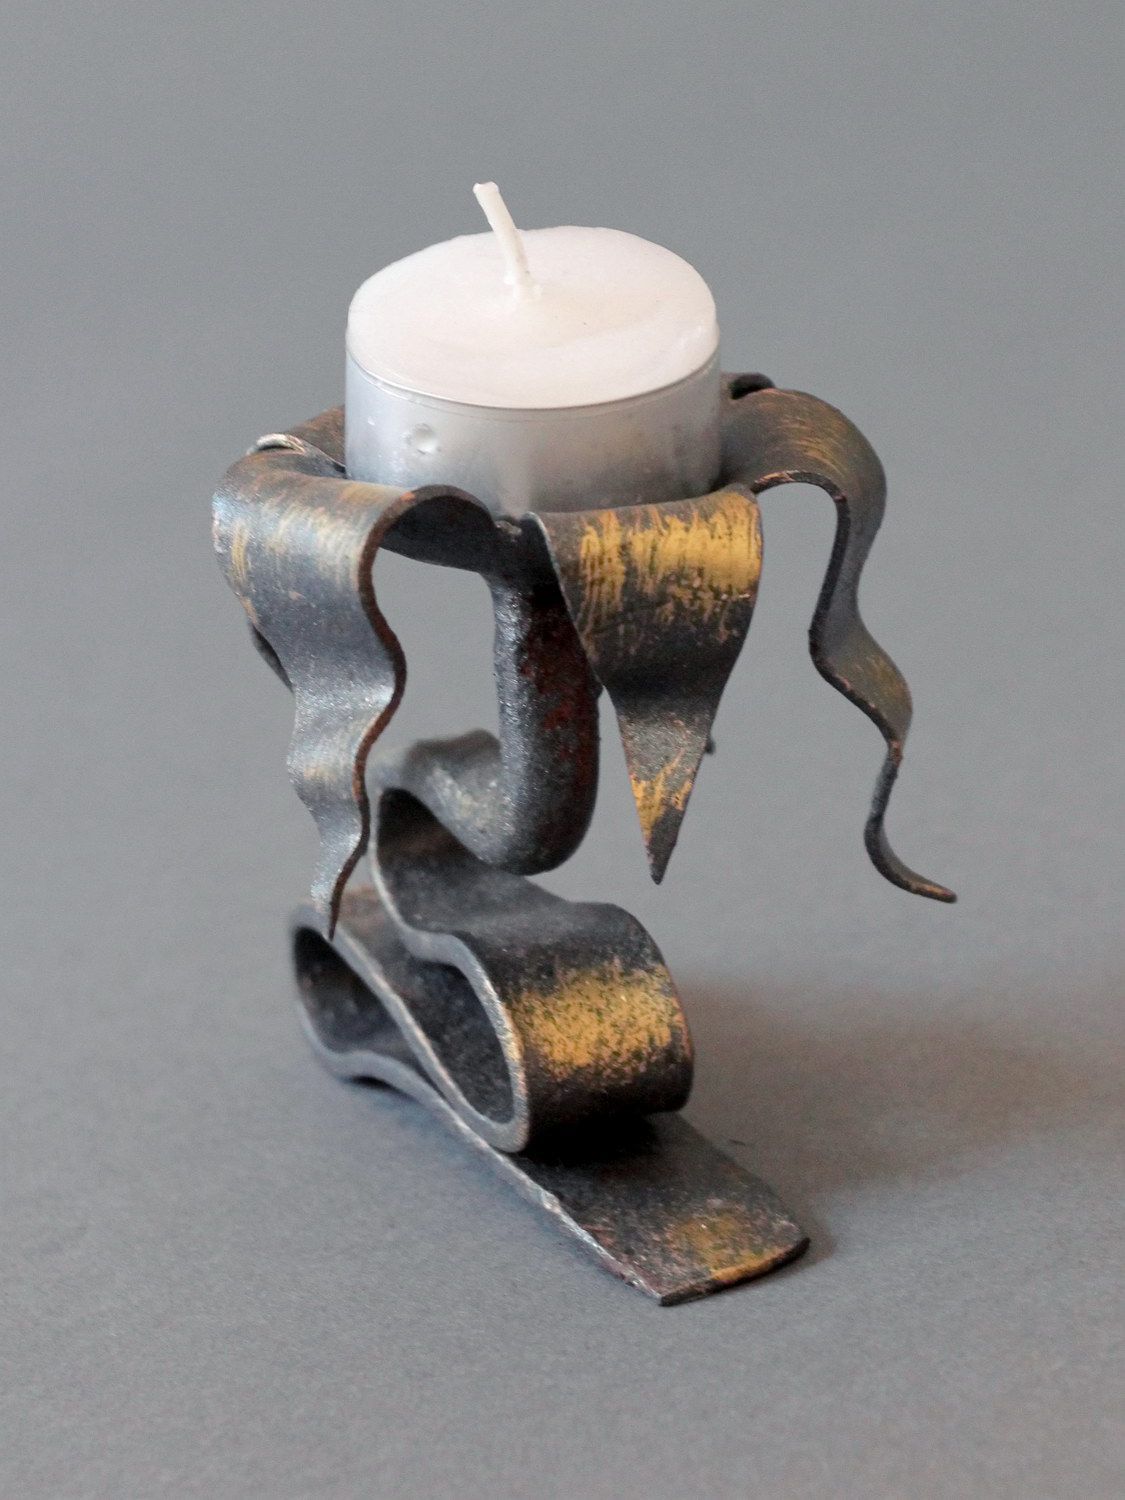 Metal forged candlestick photo 4